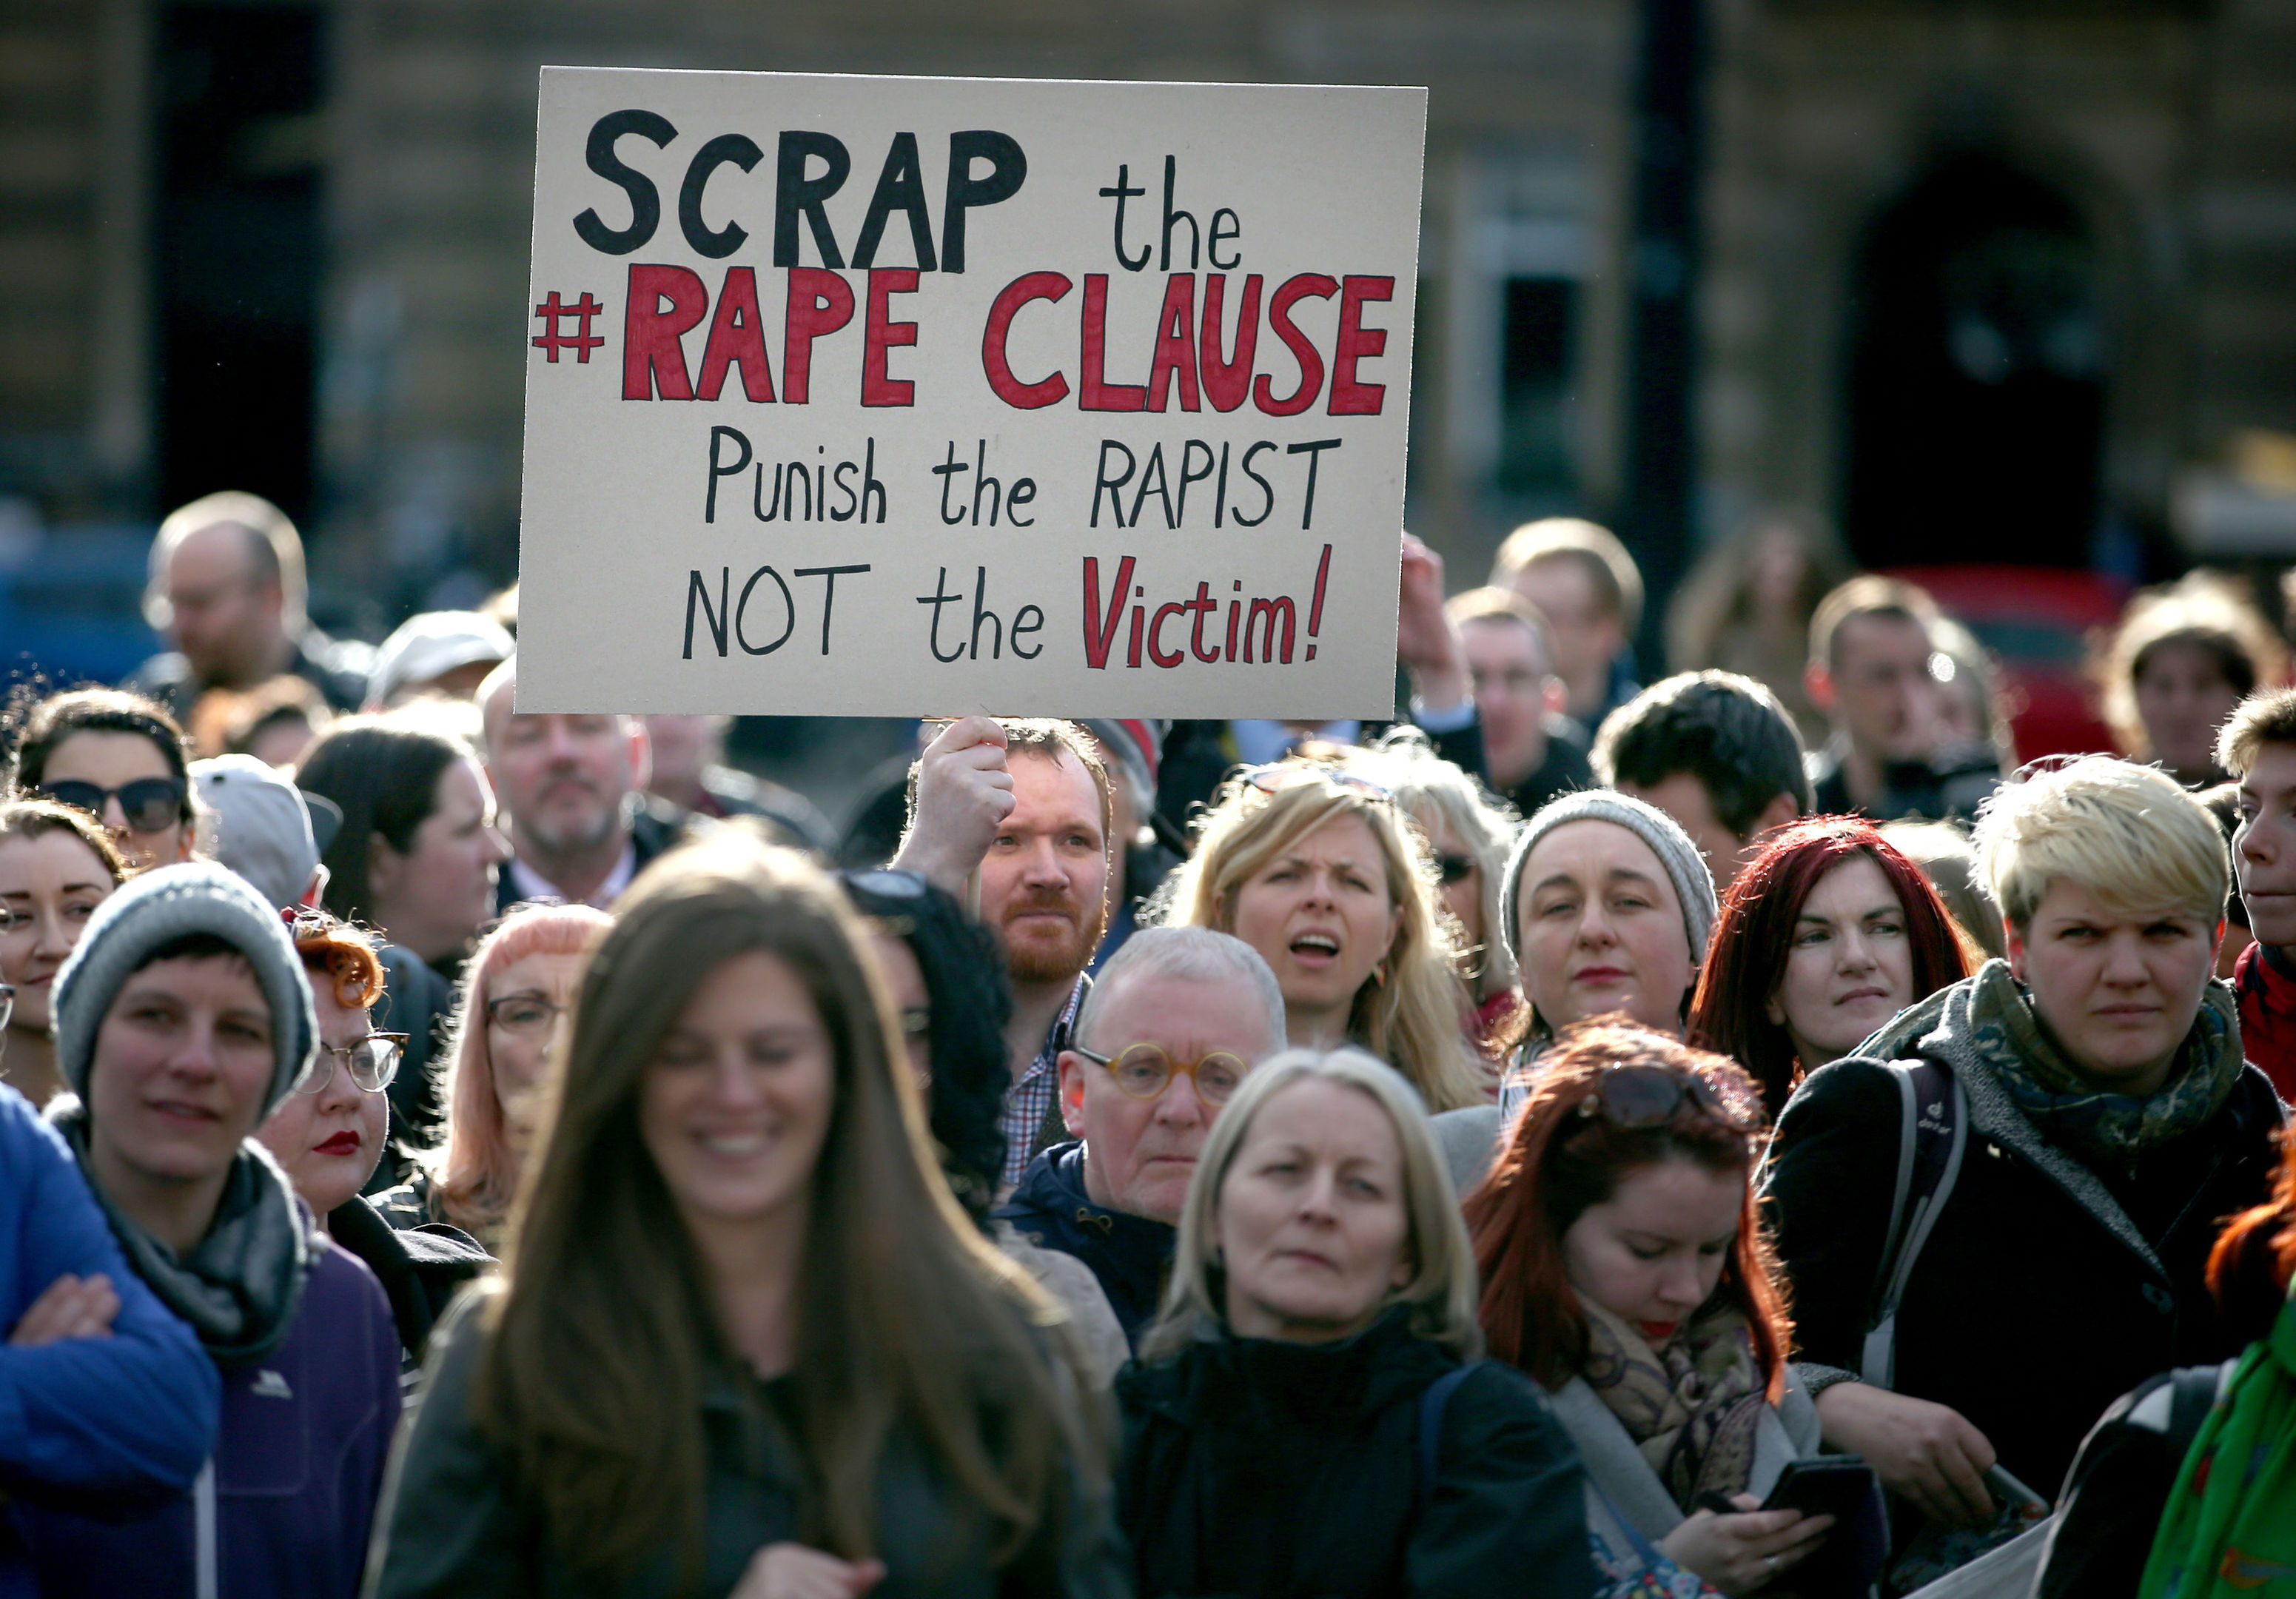 Campaigners protest in George Square, Glasgow, against the UK Government's so-called "rape clause" for tax credits. (Jane Barlow/PA Wire)